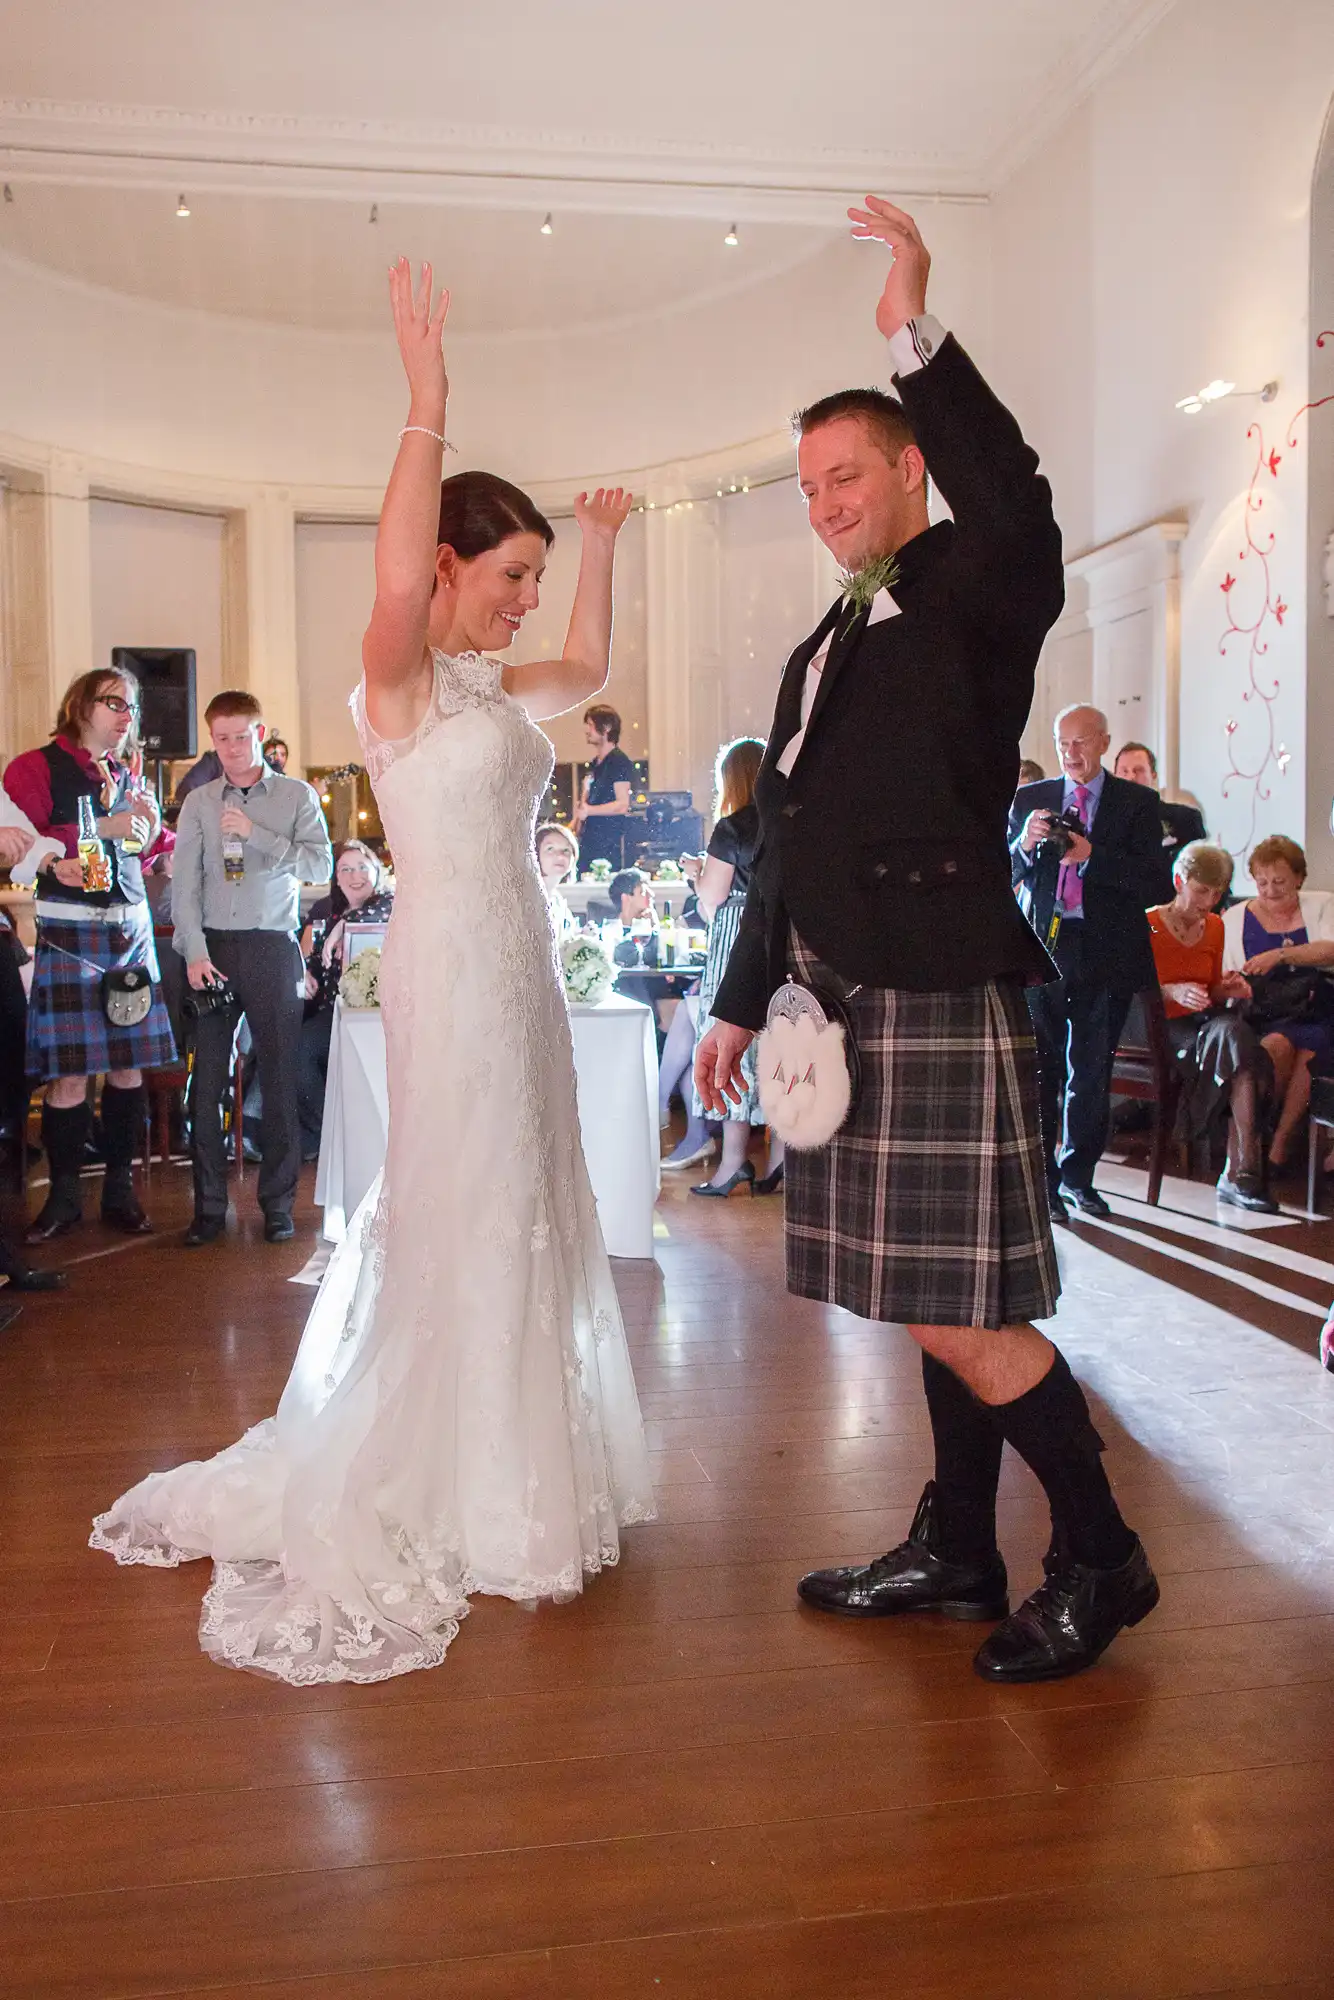 A bride in a white dress and a groom in a kilt joyfully dance with raised arms at their wedding reception, surrounded by guests.